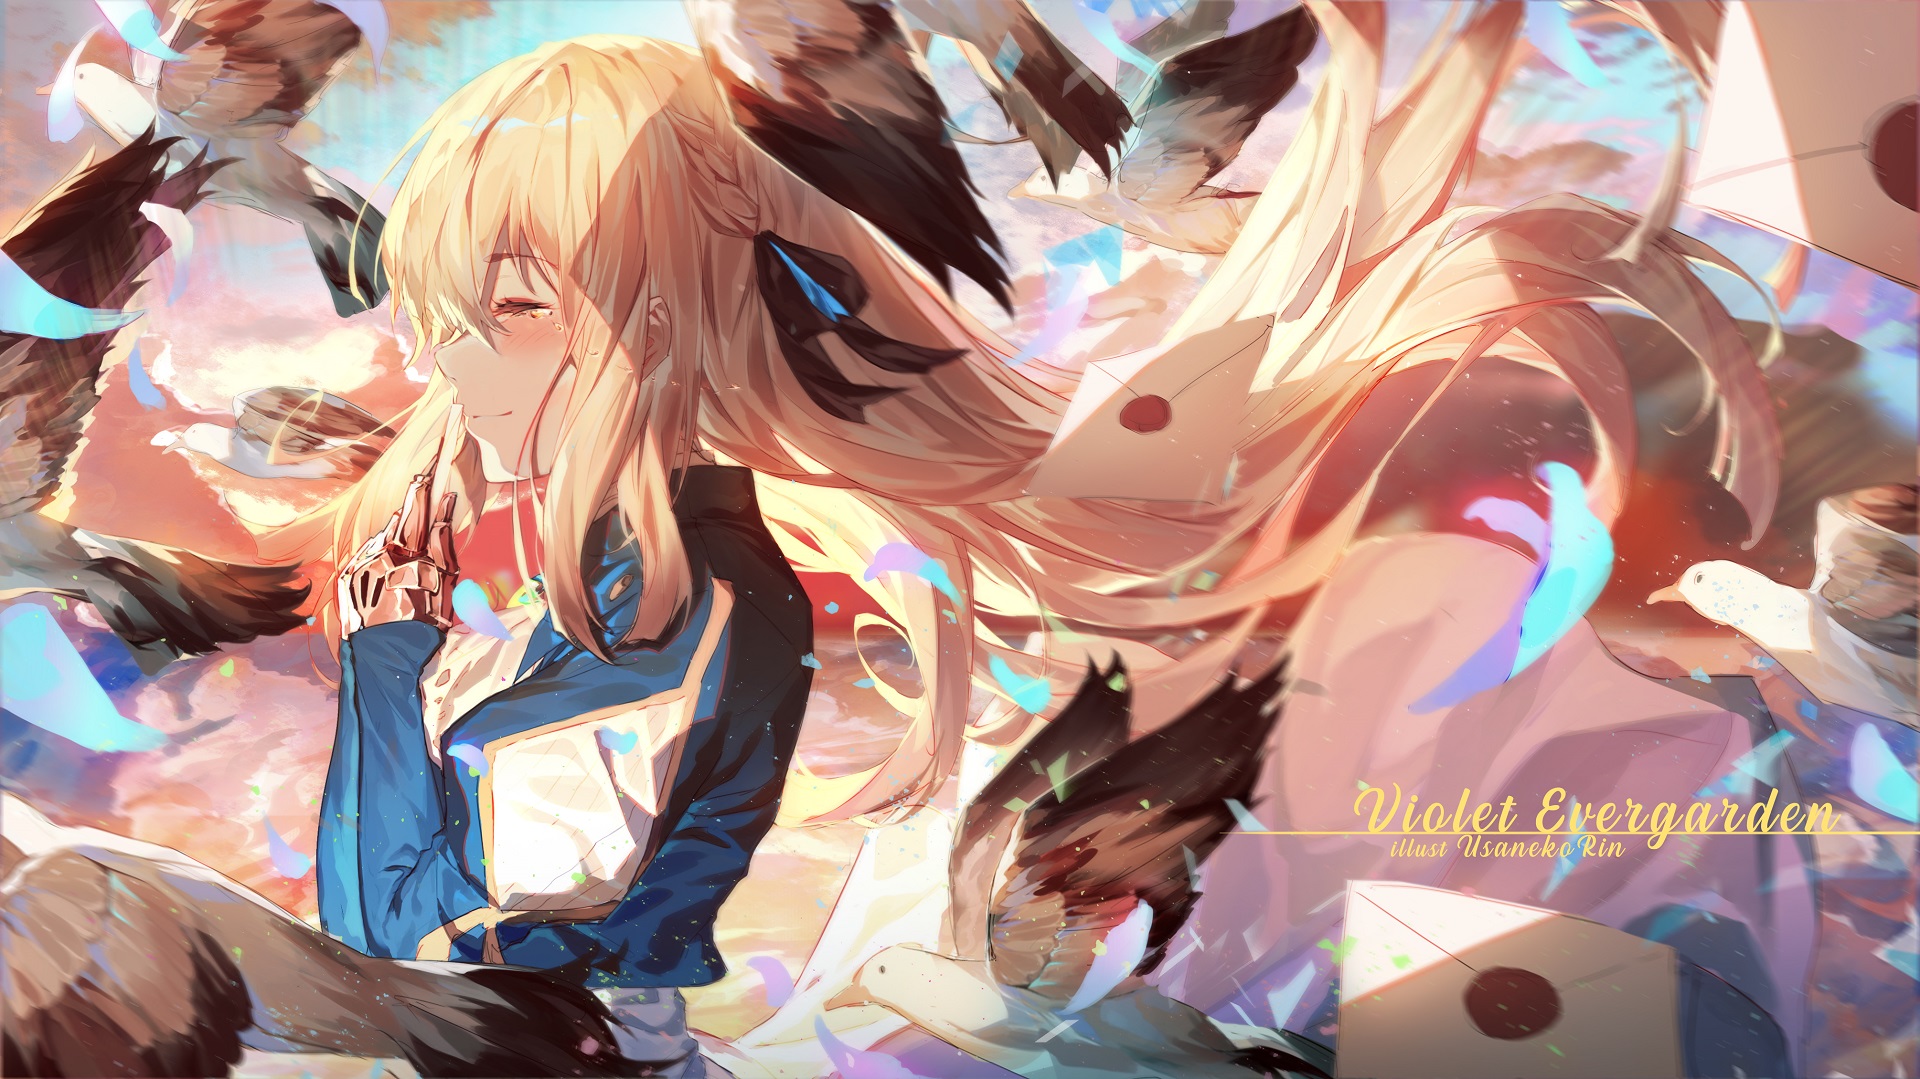 My collection of 63 Violet Evergarden wallpaper